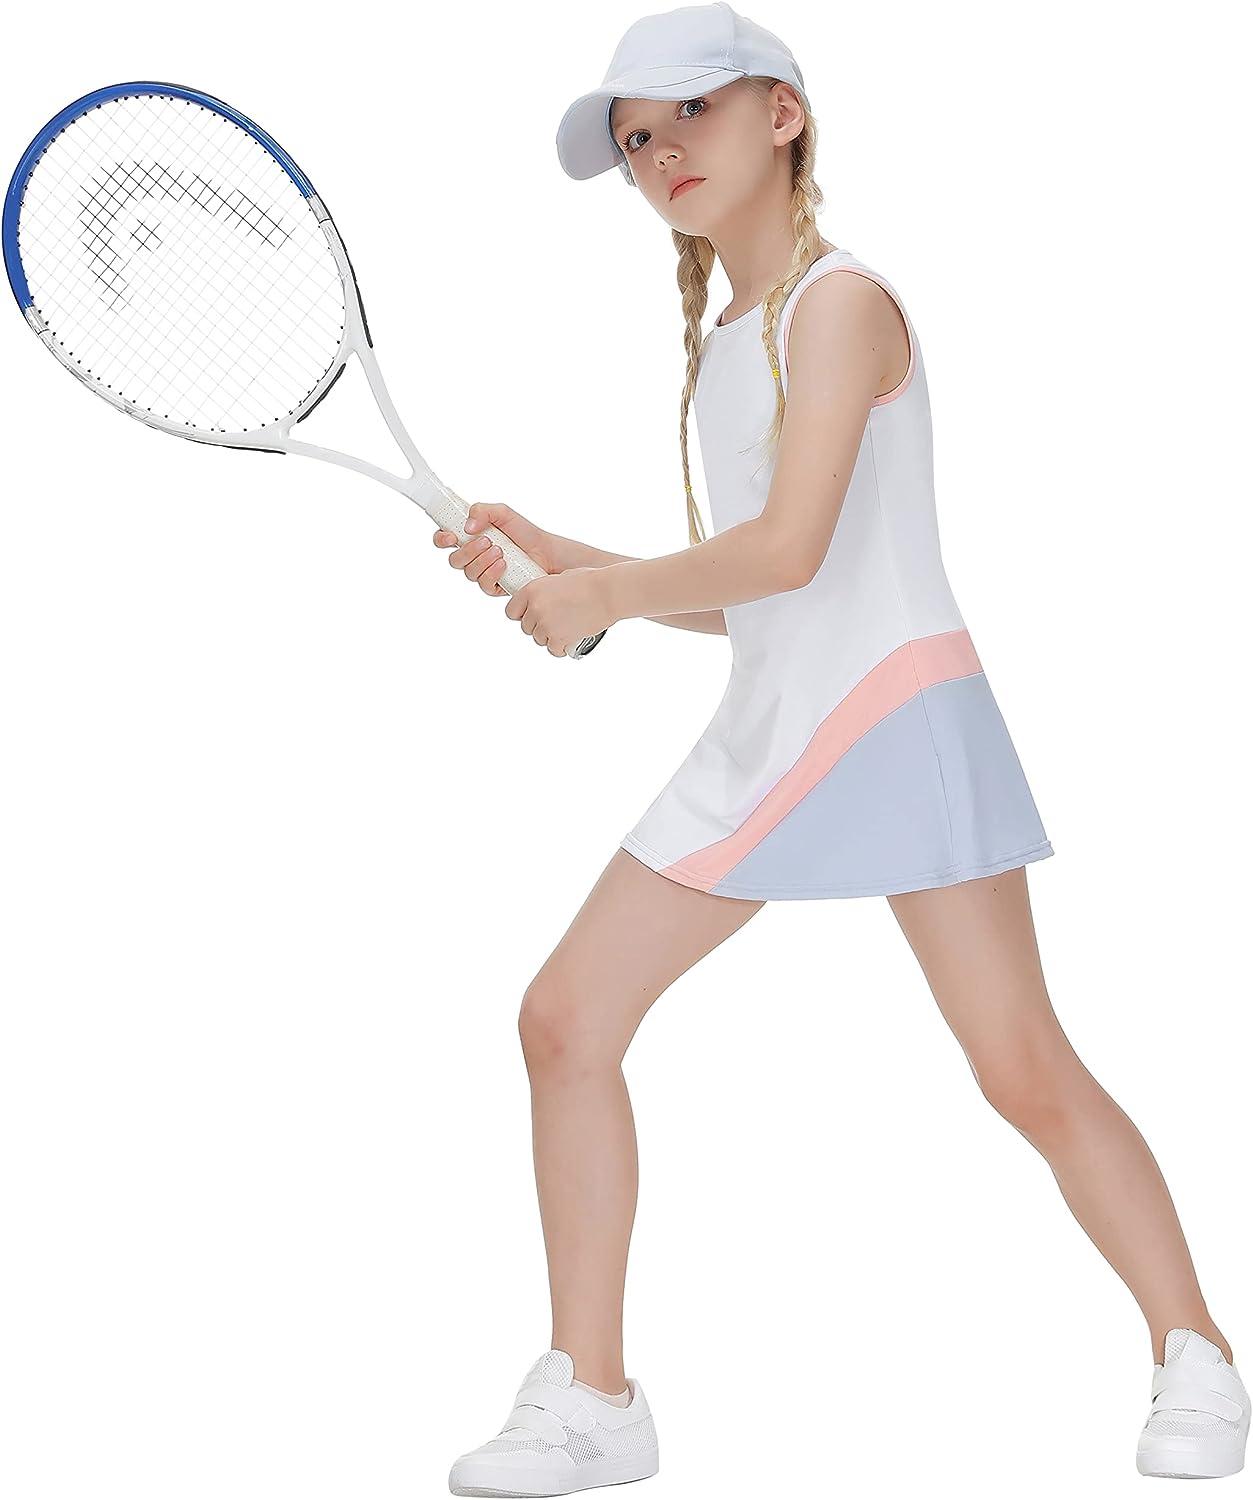 JACK SMITH Youth Girls Tennis Dresses Golf Sleeveless Outfit School Sports  Dress with Shorts Pockets White 6 Years